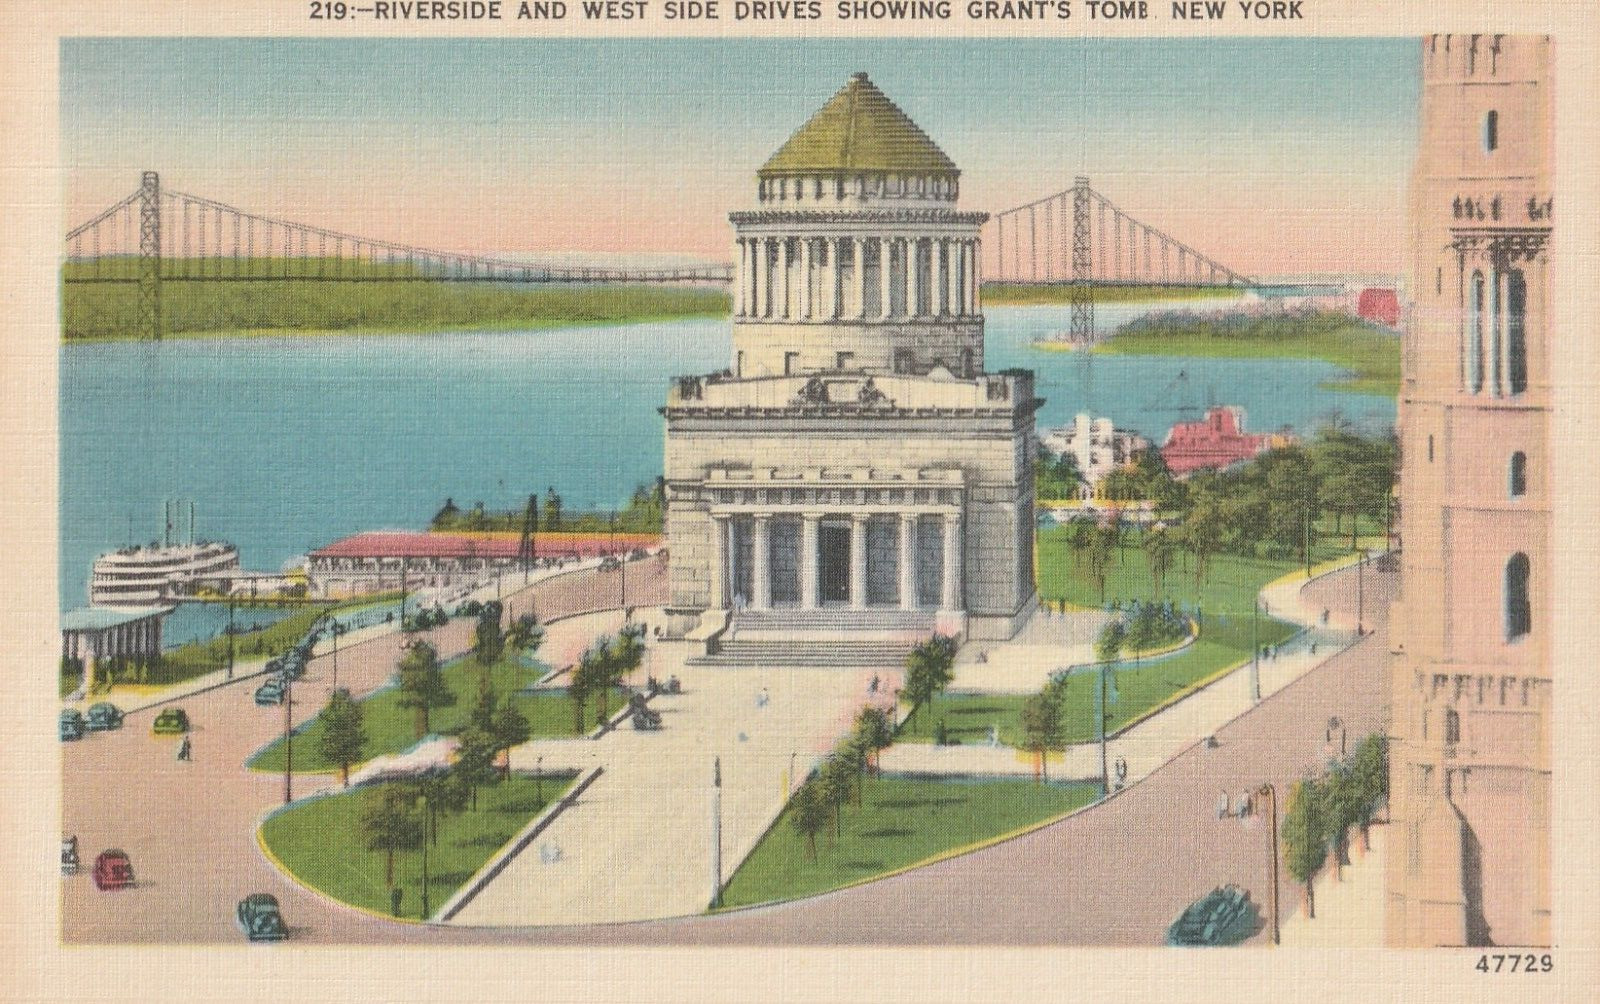 Vintage Postcard Riverside and West Side Drives Showing Grant's Tomb NY Posted